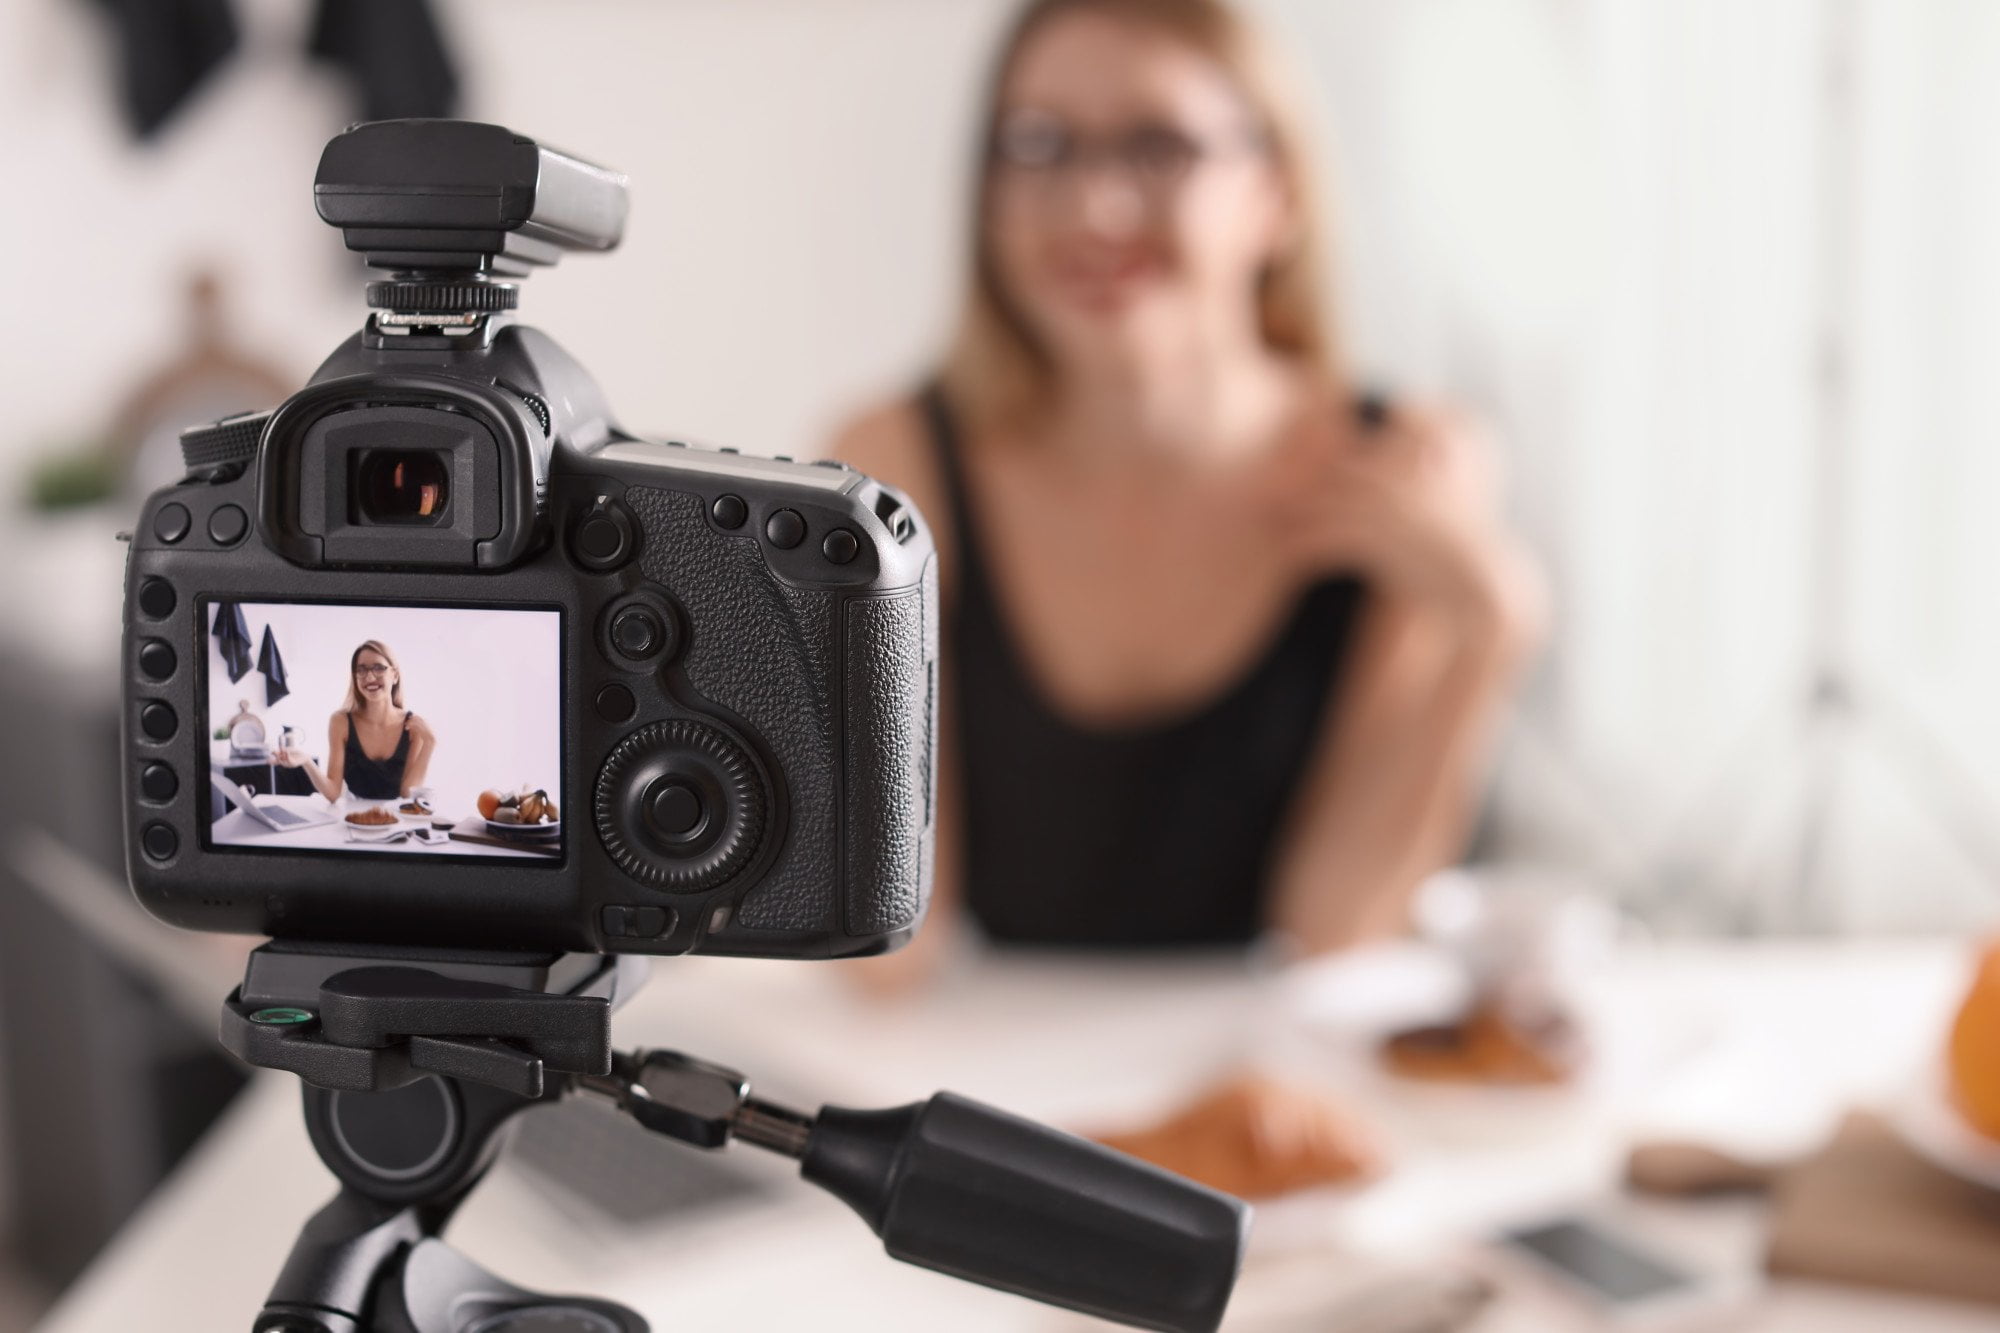 There are several ways personalized video marketing can be beneficial for companies. Keep reading to learn more about these advantages.